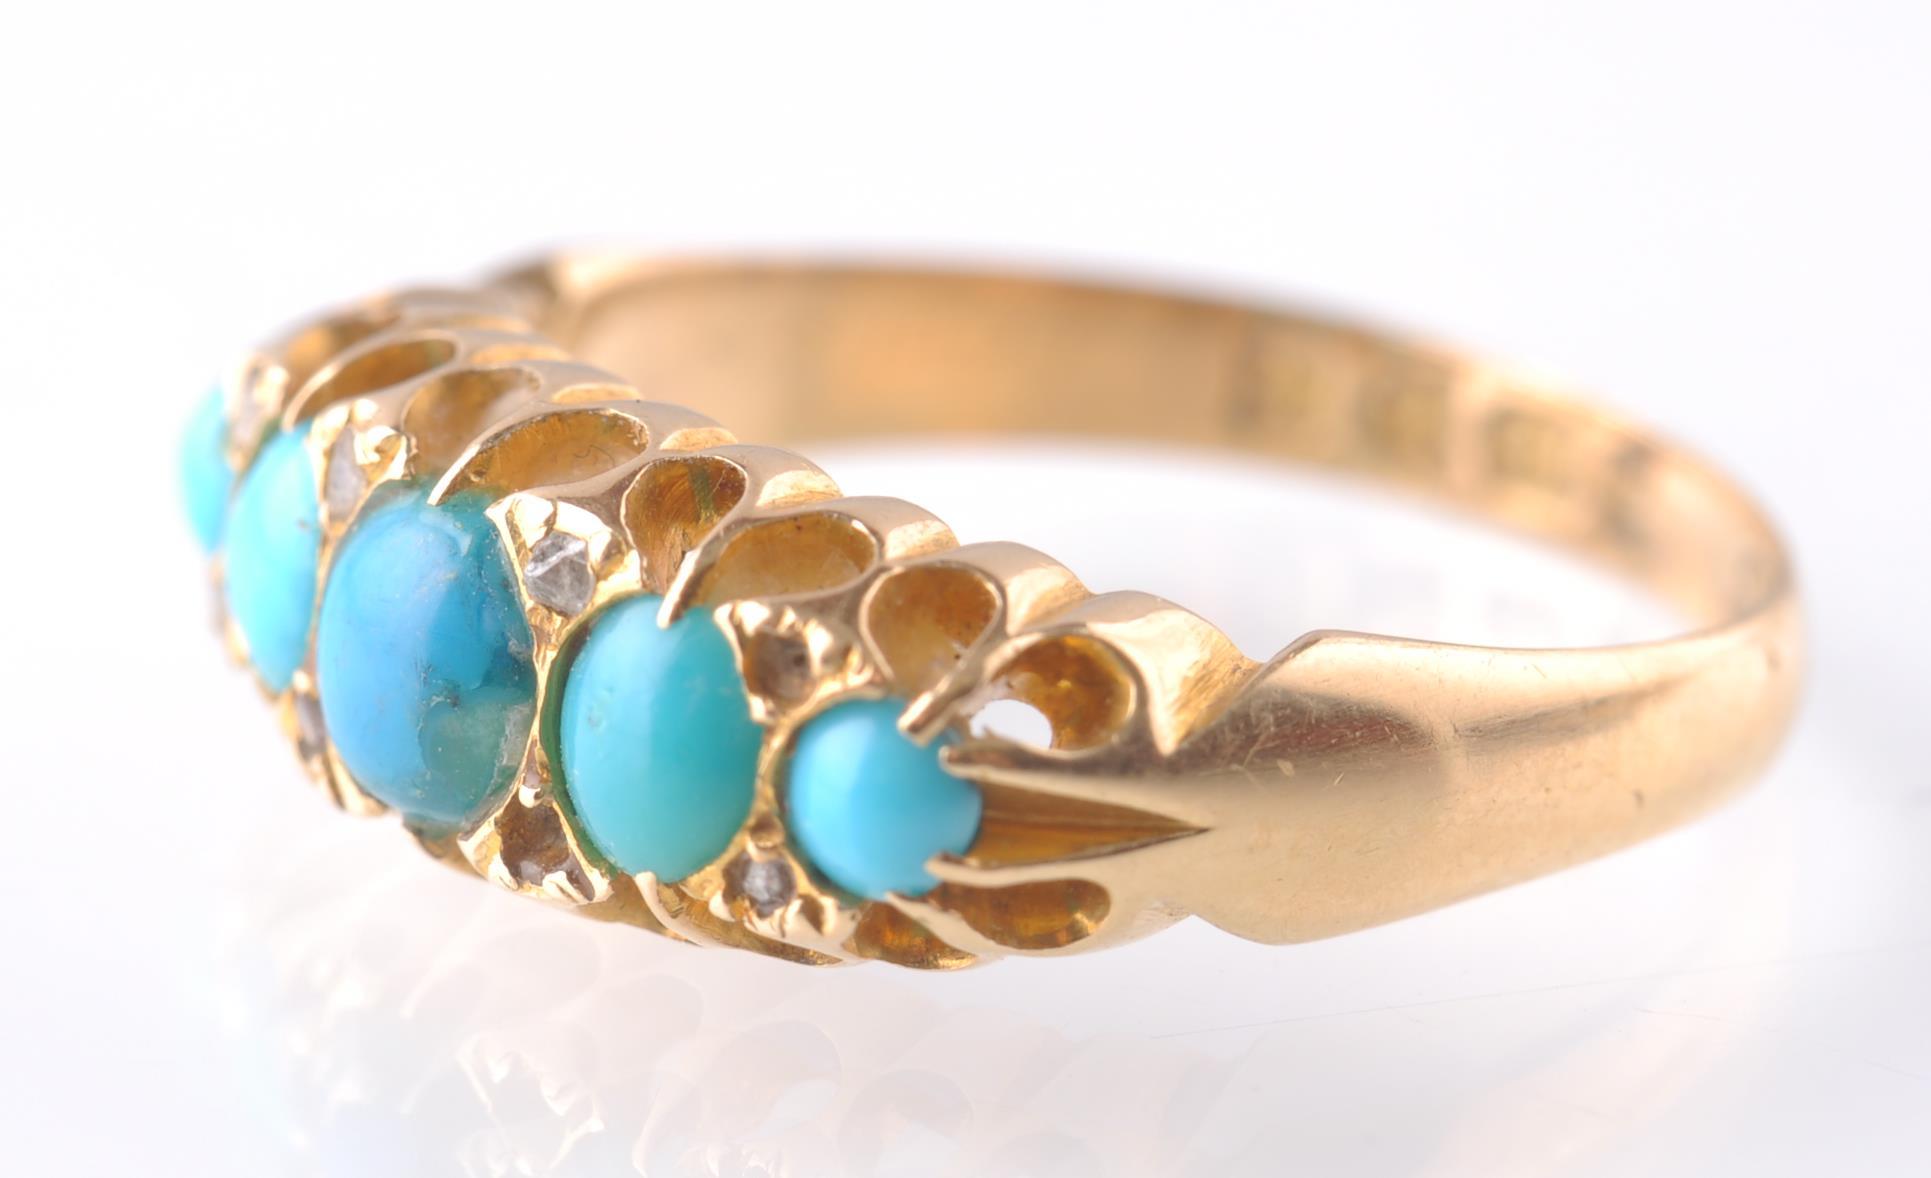 An 18CT GOLD & TURQUOISE GYPSY RING - 1915 - Image 2 of 4